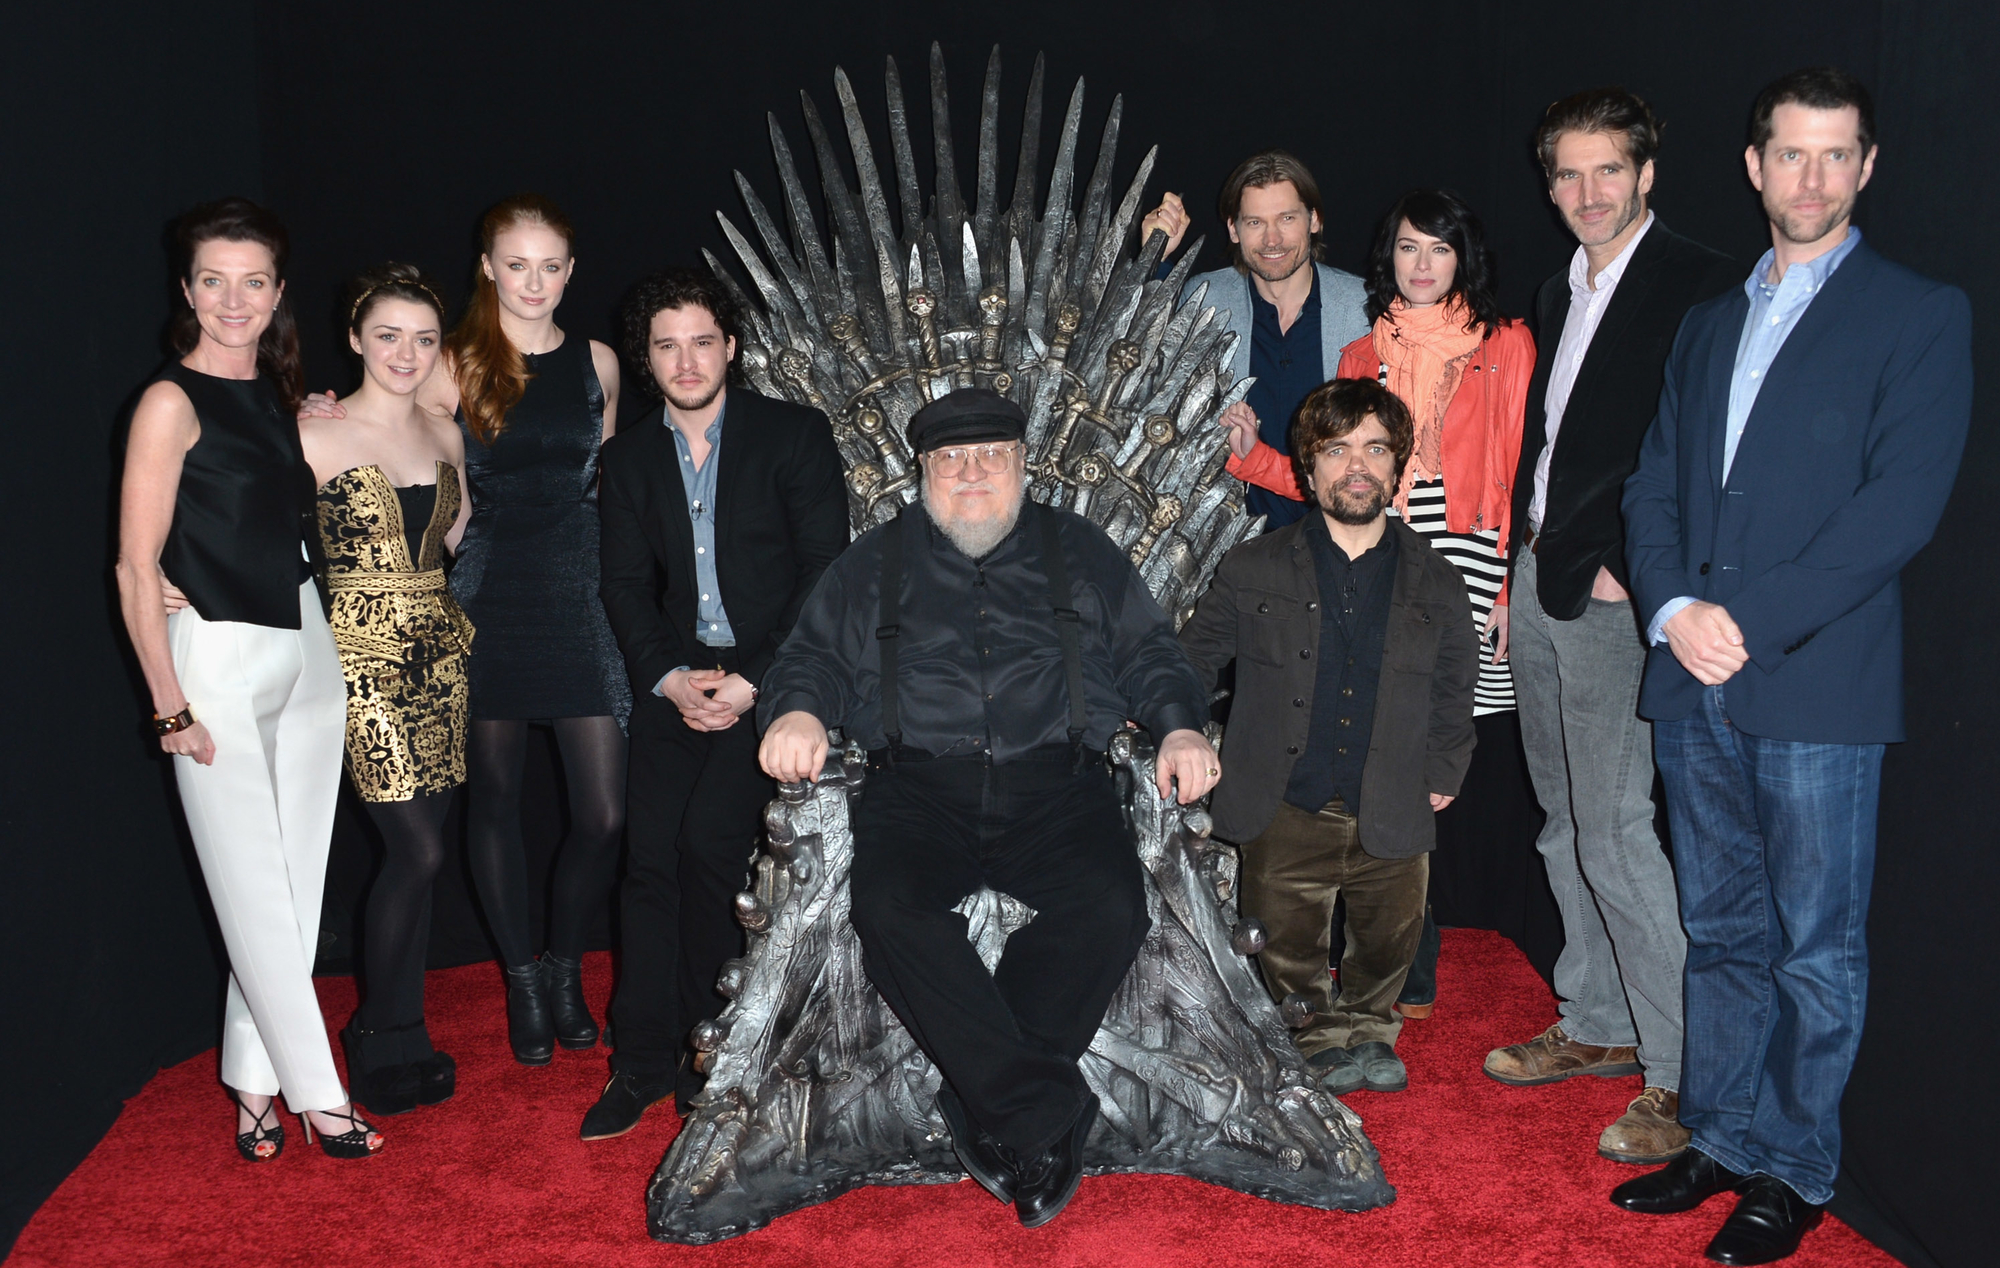 Can You Answer All 20 of These Super Easy Trivia Questions Correctly? Games Of Thrones Cast